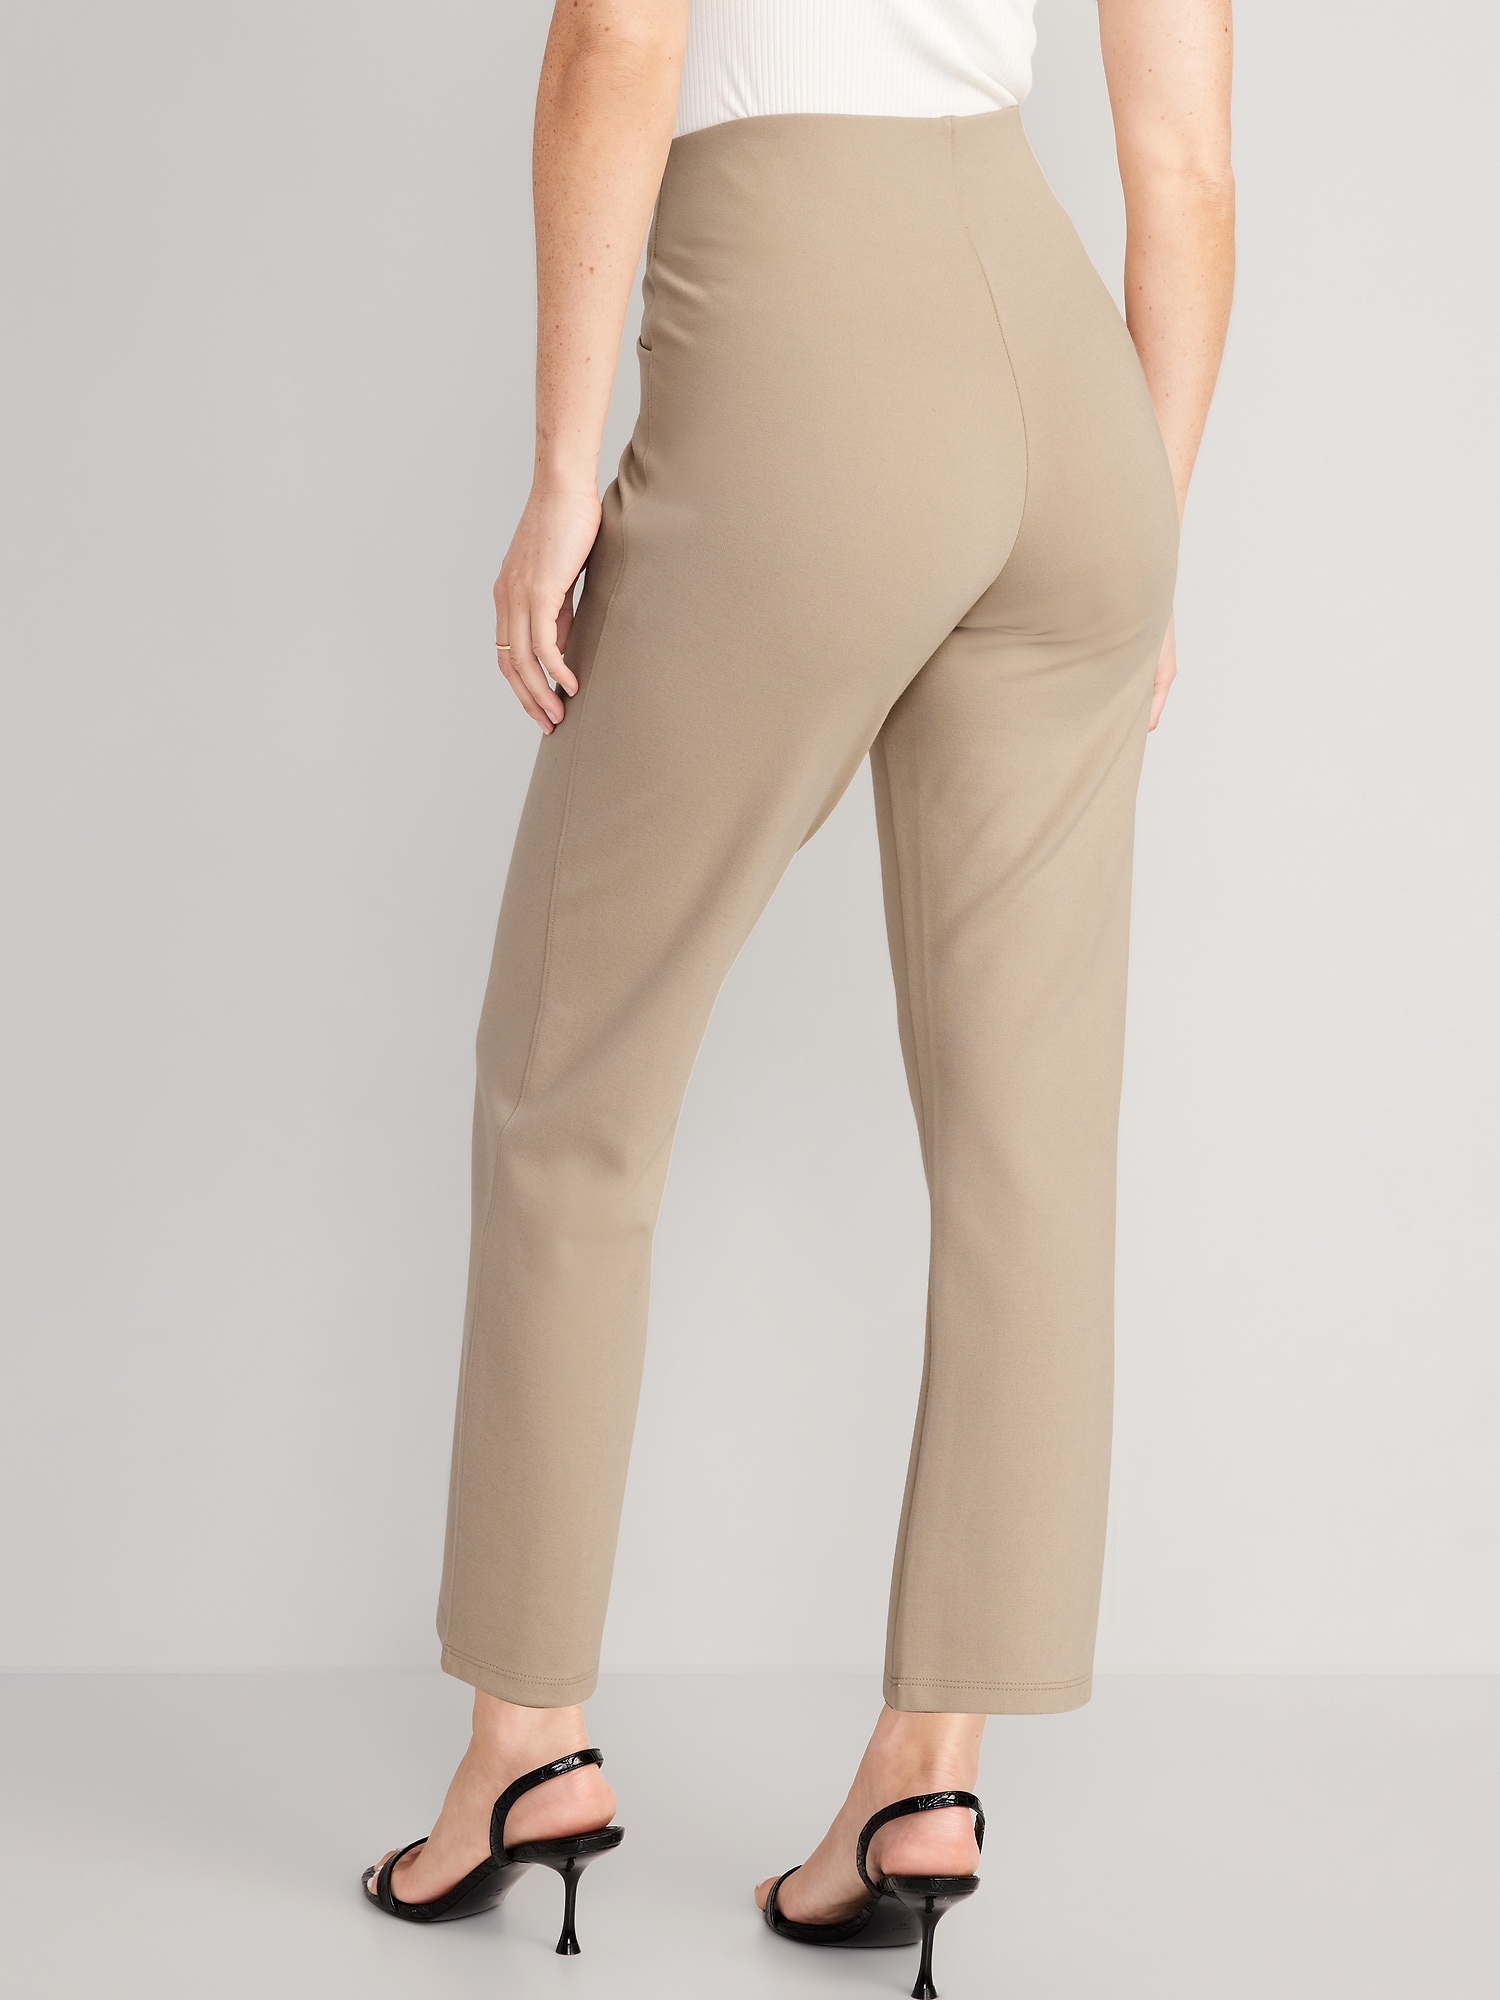 Plus Size Straight Leg Pants for Women High Waist Drawstring Casual Pant  Solid Color Loose Ankle Length Trousers - Walmart.com